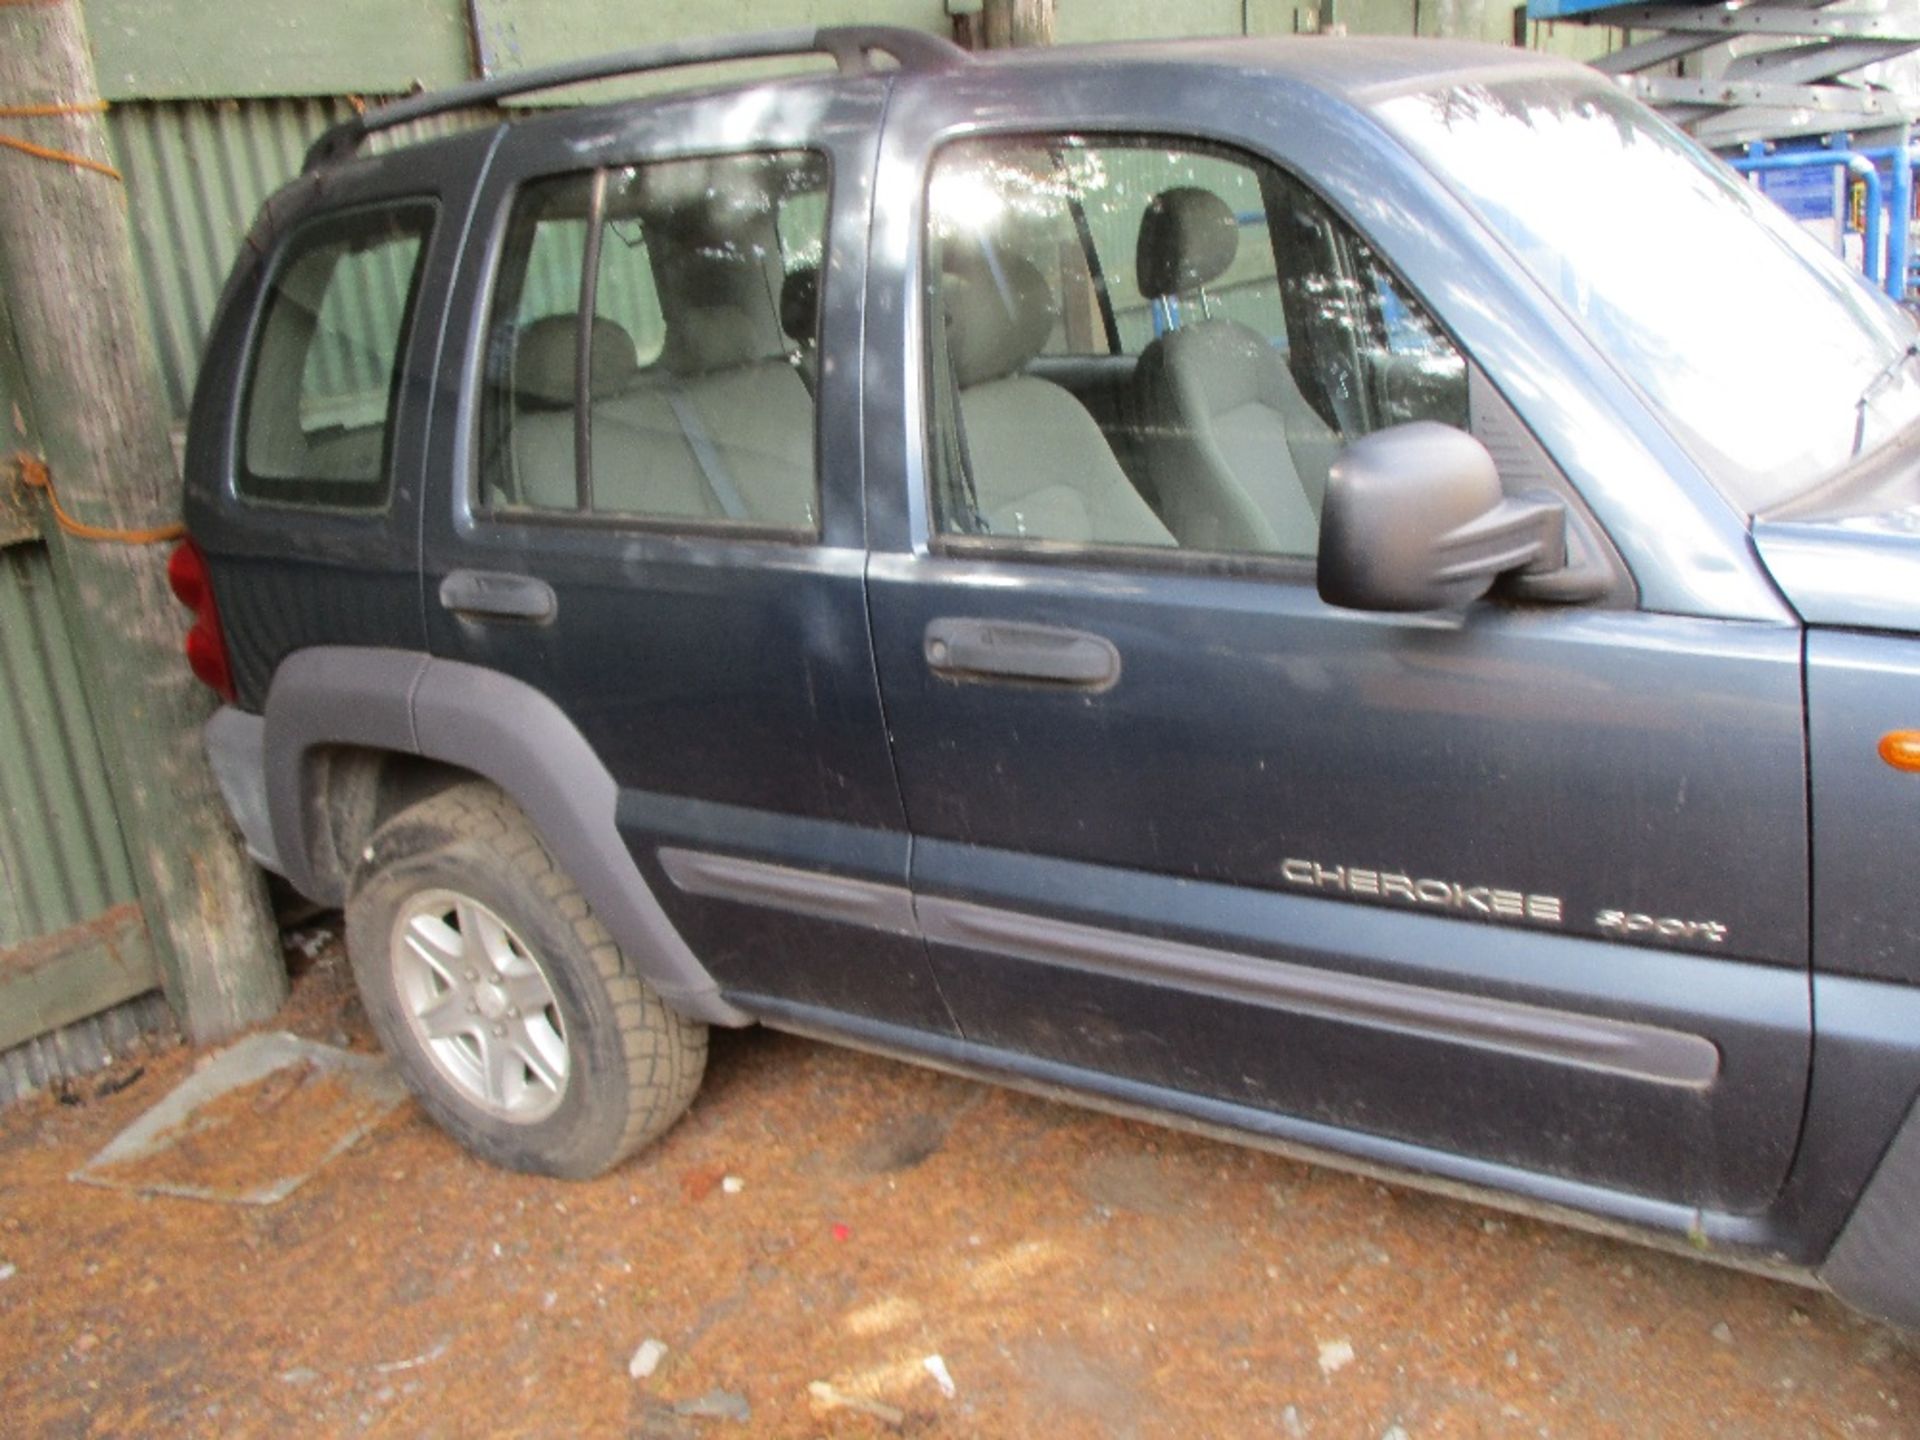 JEEP CHEROKEE DIESEL, BLUE, REG:PJ52 ODL NEEDS NEW KEY BARREL WHEN TESTED WAS SEEN TO START DRIVE - Image 7 of 7